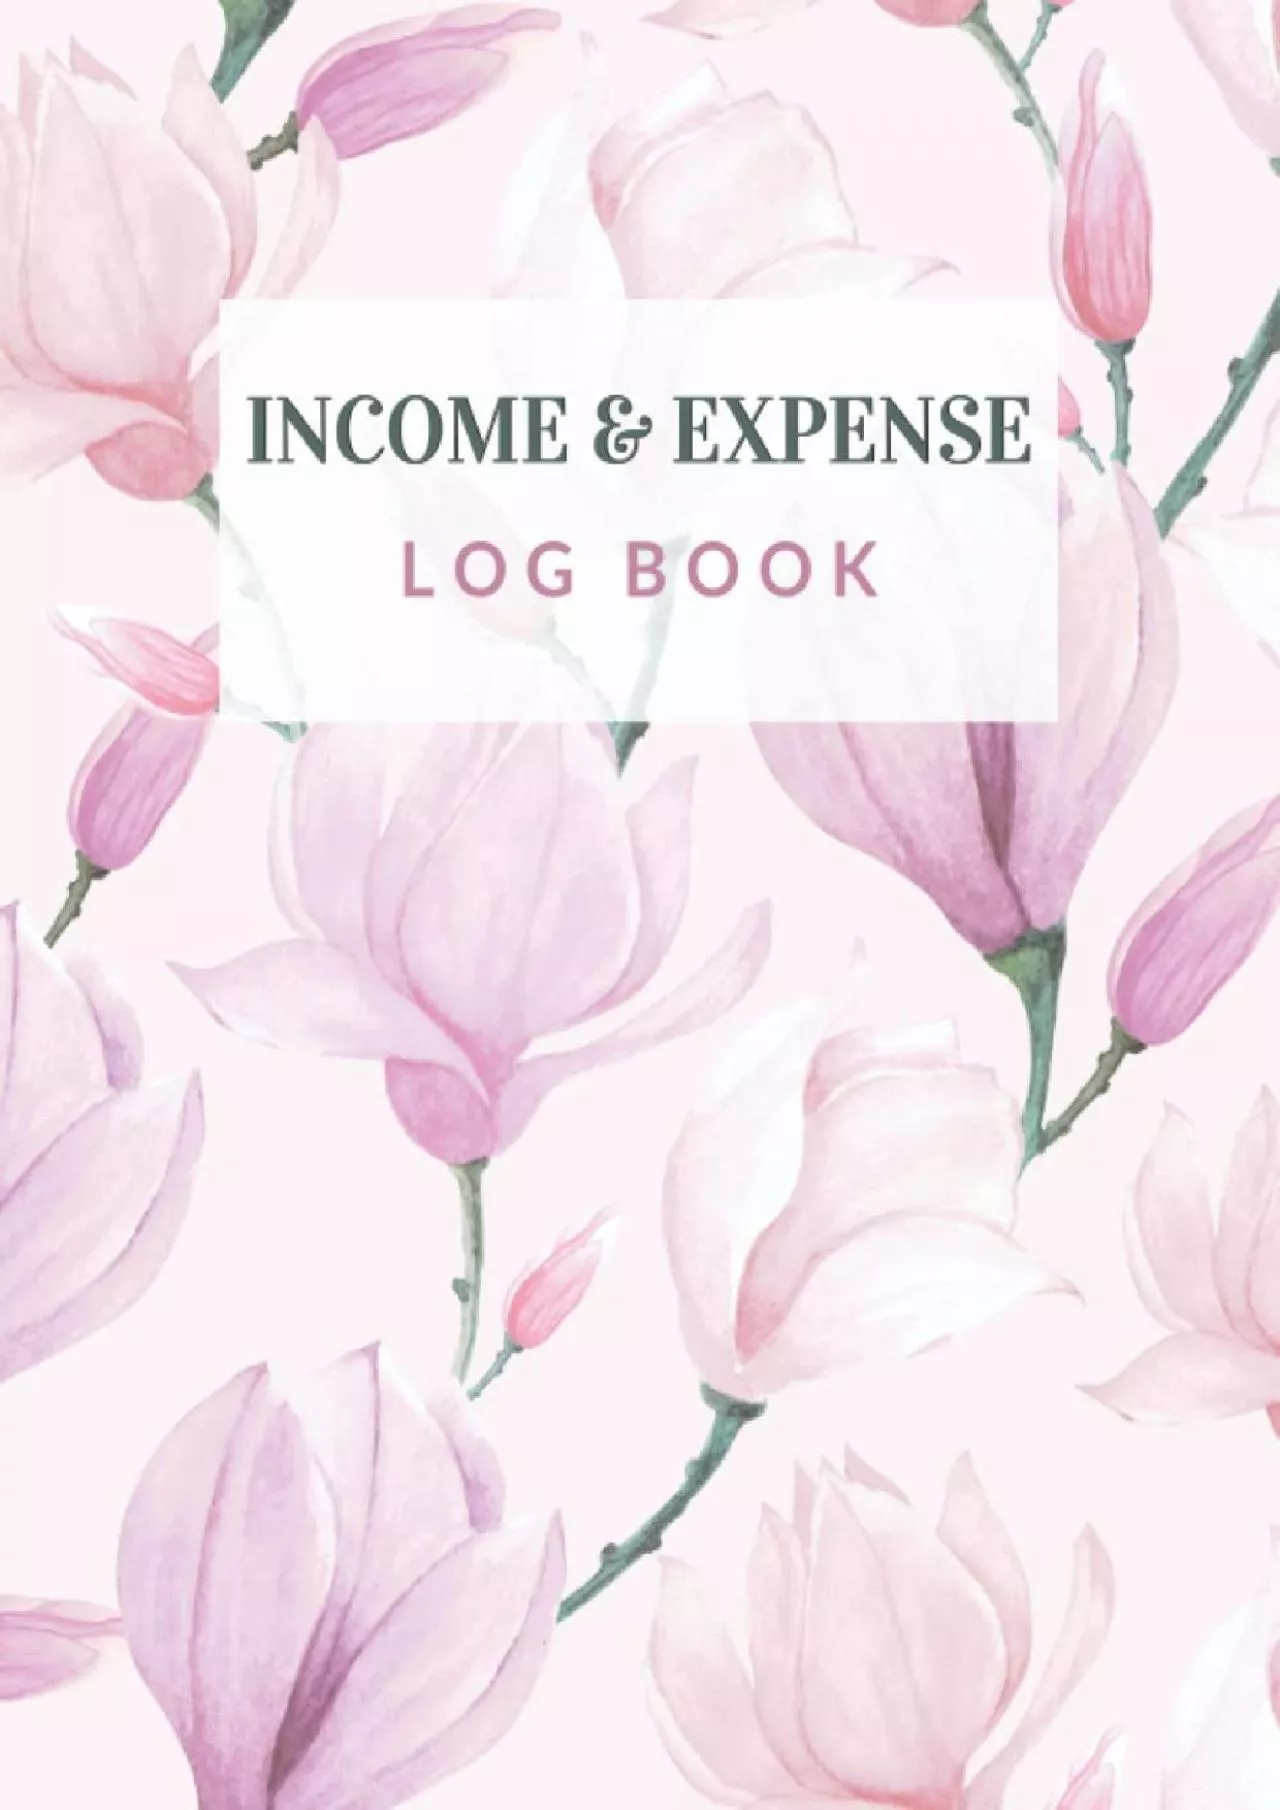 Income and Expense Log Book: Ledger Book for Tracking Income and Expenses for Small Business